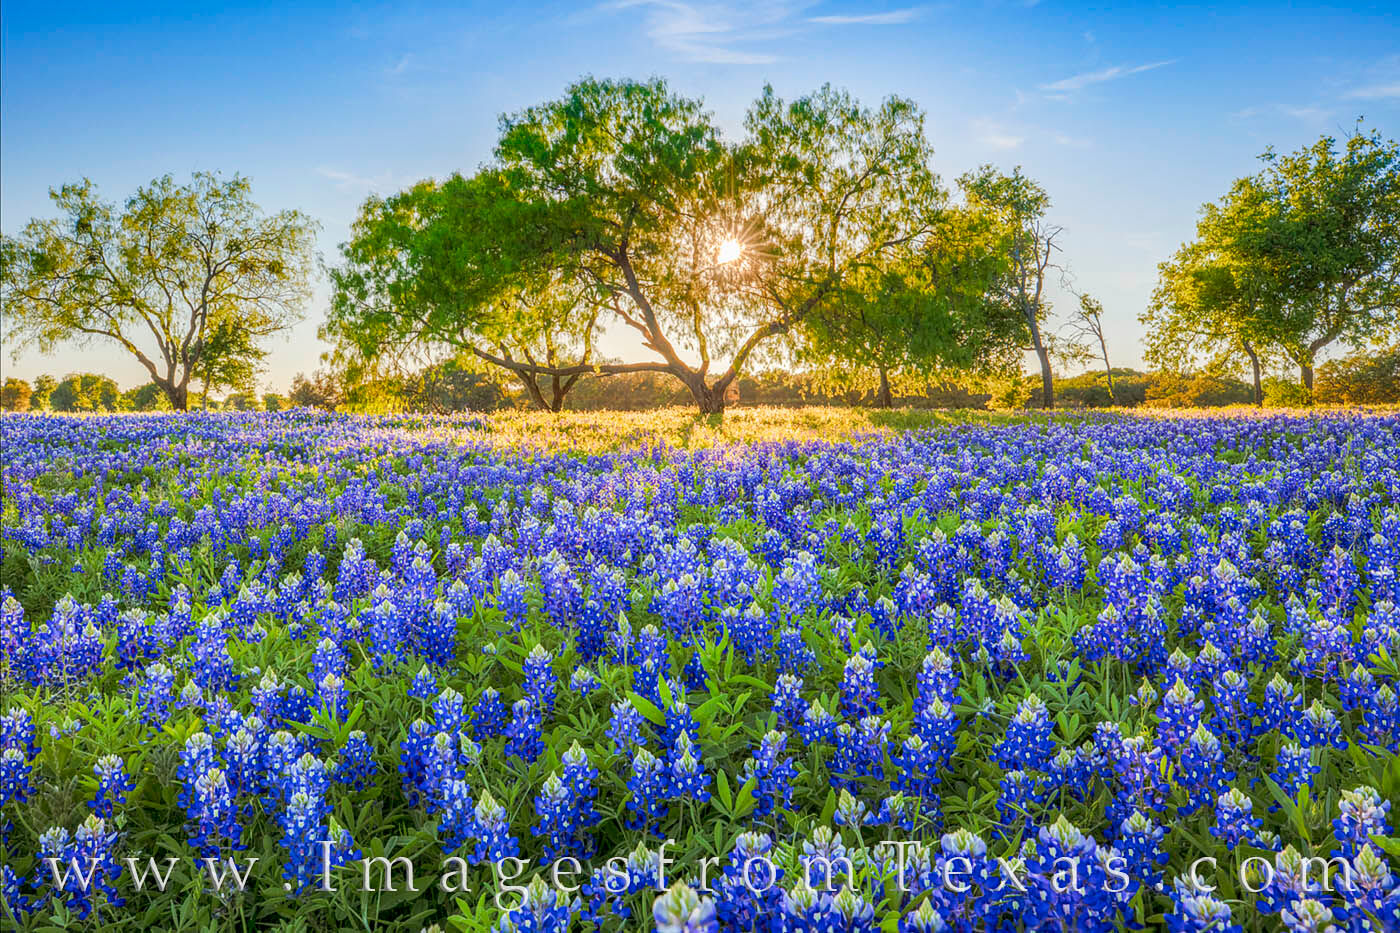 Sunlight sneaks through the leaves of this old tree and gives last light to this amazing field of spring bluebonnets in the Texas...